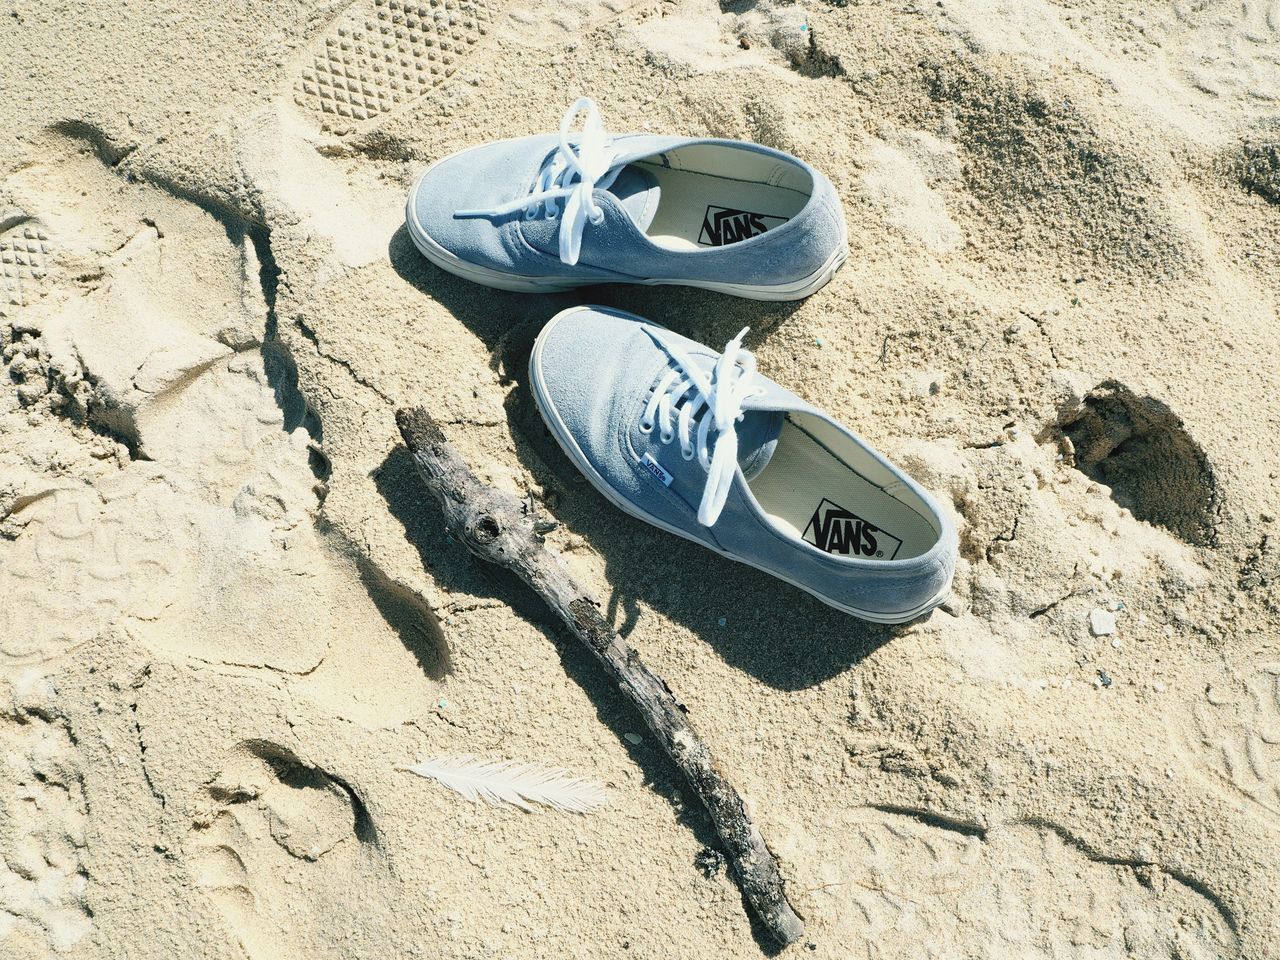 HIGH ANGLE VIEW OF SHOES ON BEACH